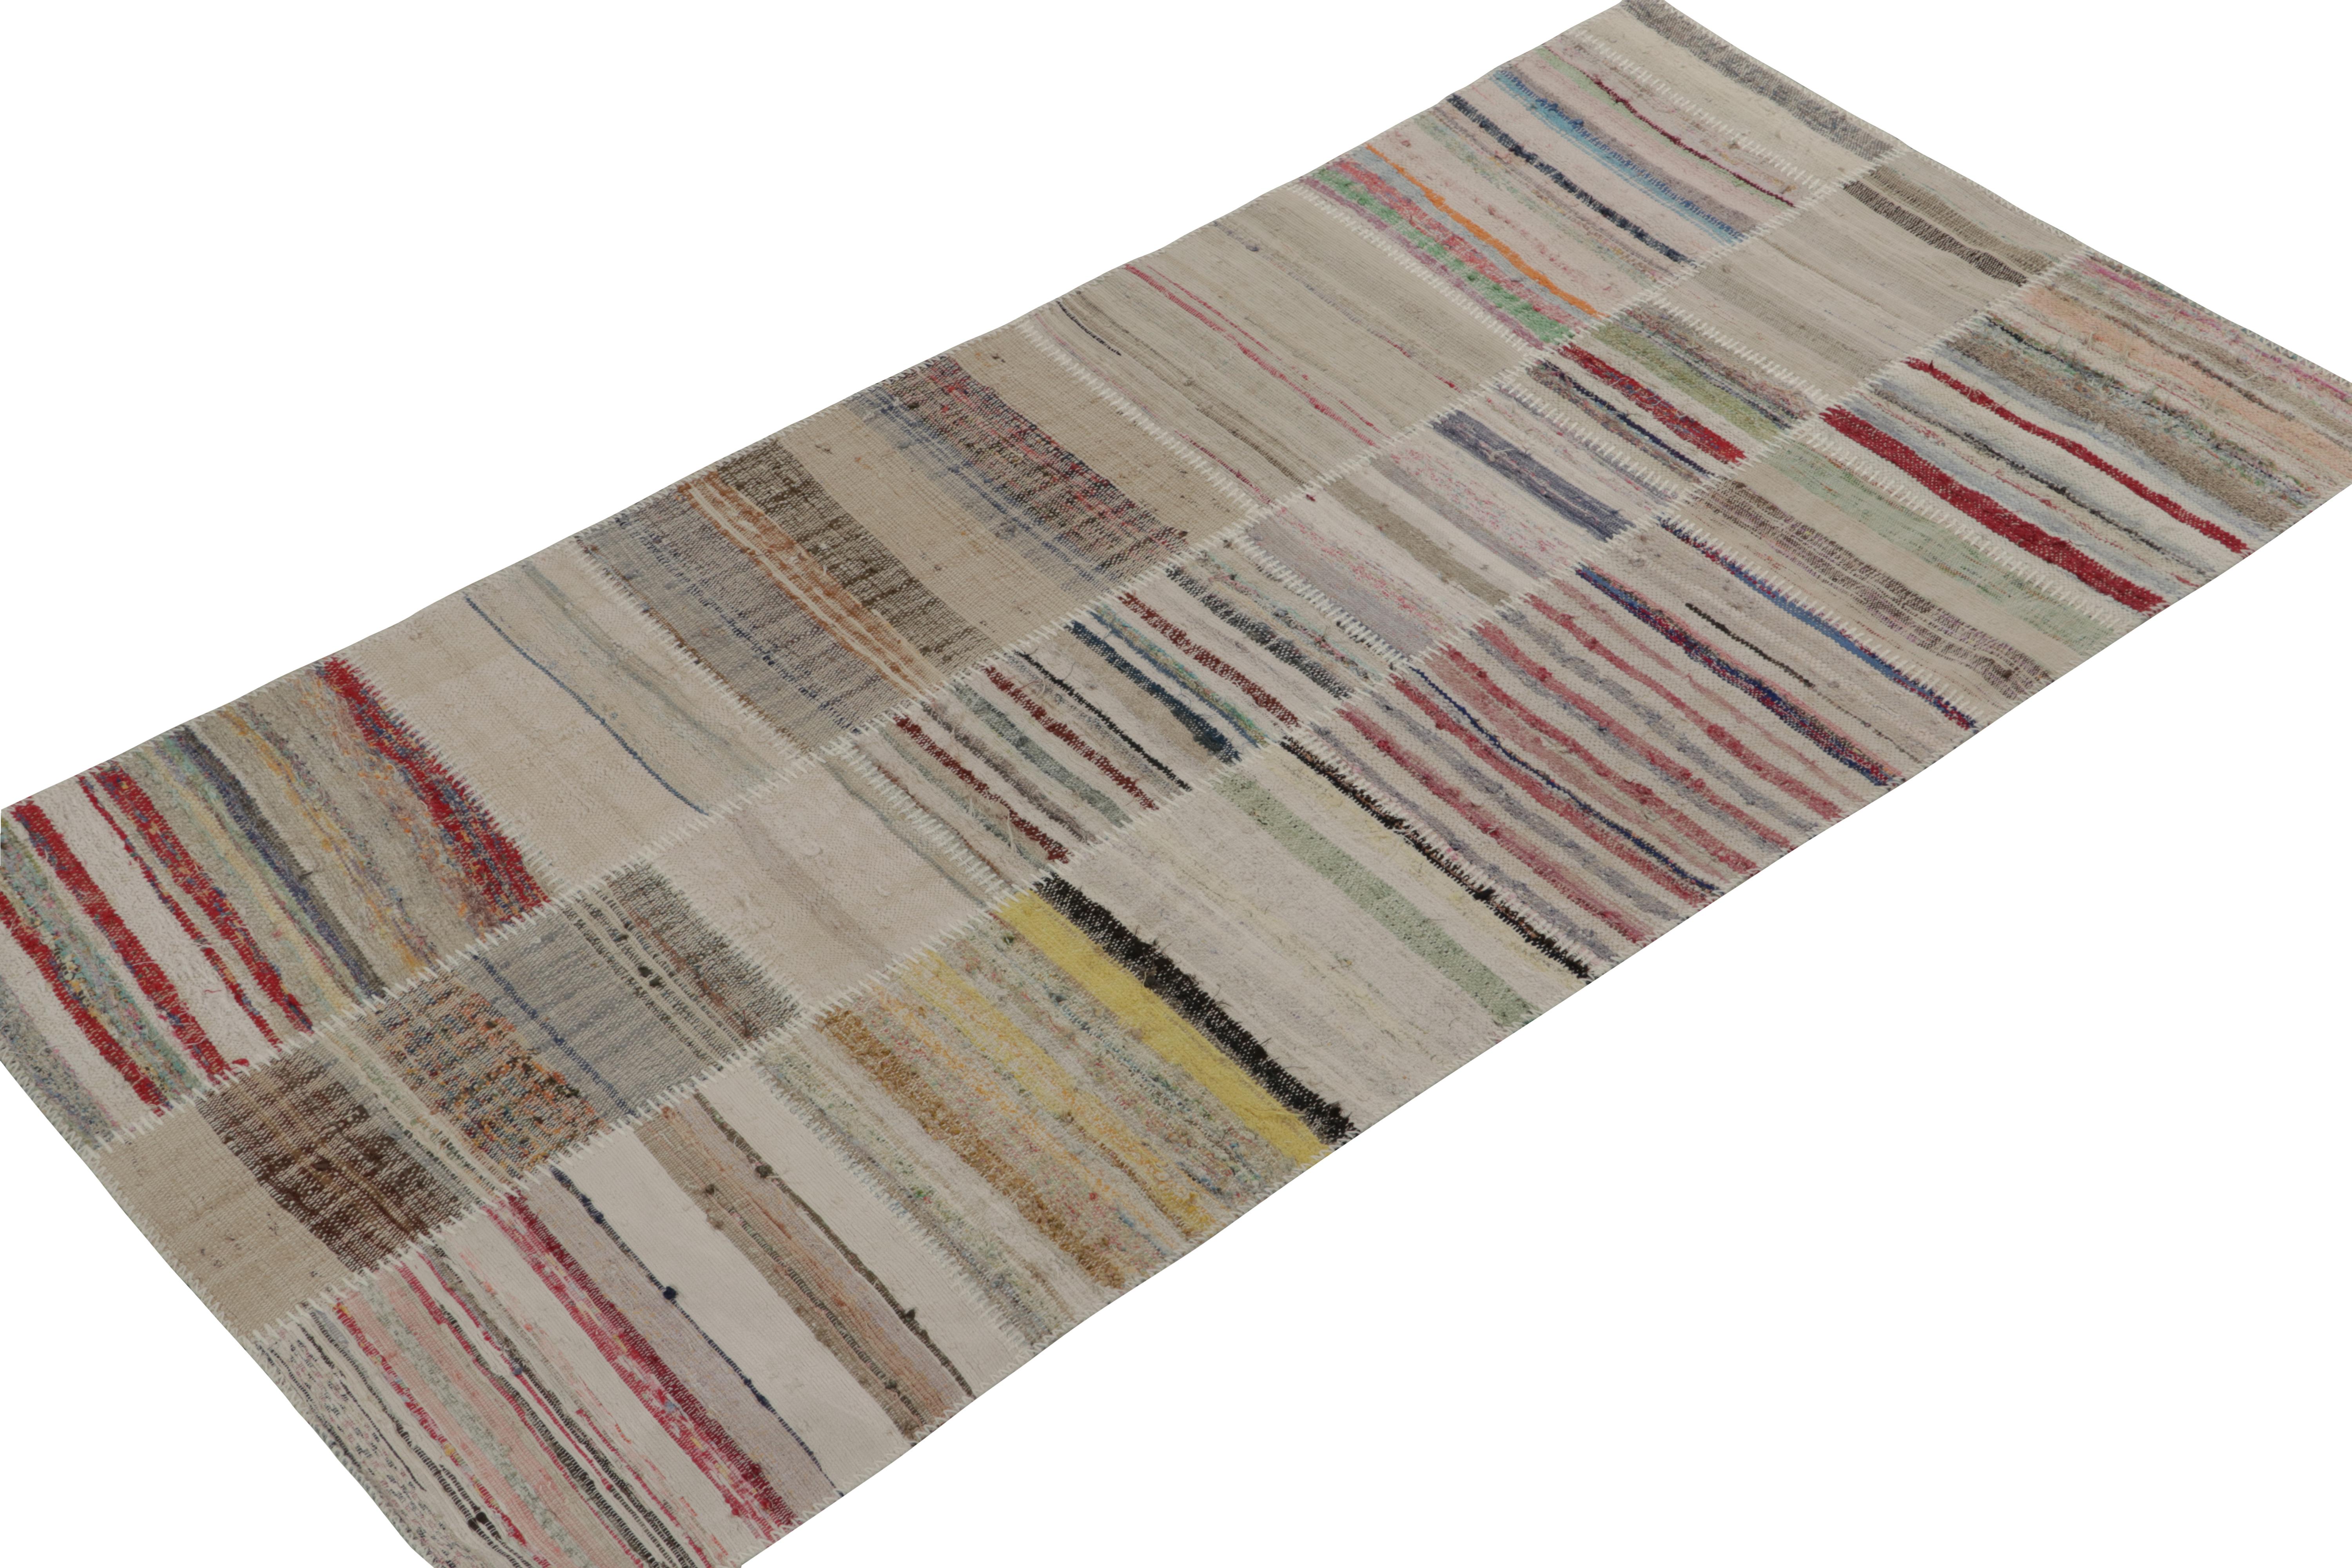 Handwoven in wool, Rug & Kilim presents a 4x8 contemporary rug from their innovative new patchwork kilim collection. 

On the Design: 

This flat weave technique repurposes vintage yarns in polychromatic stripes and striae, achieving a playful